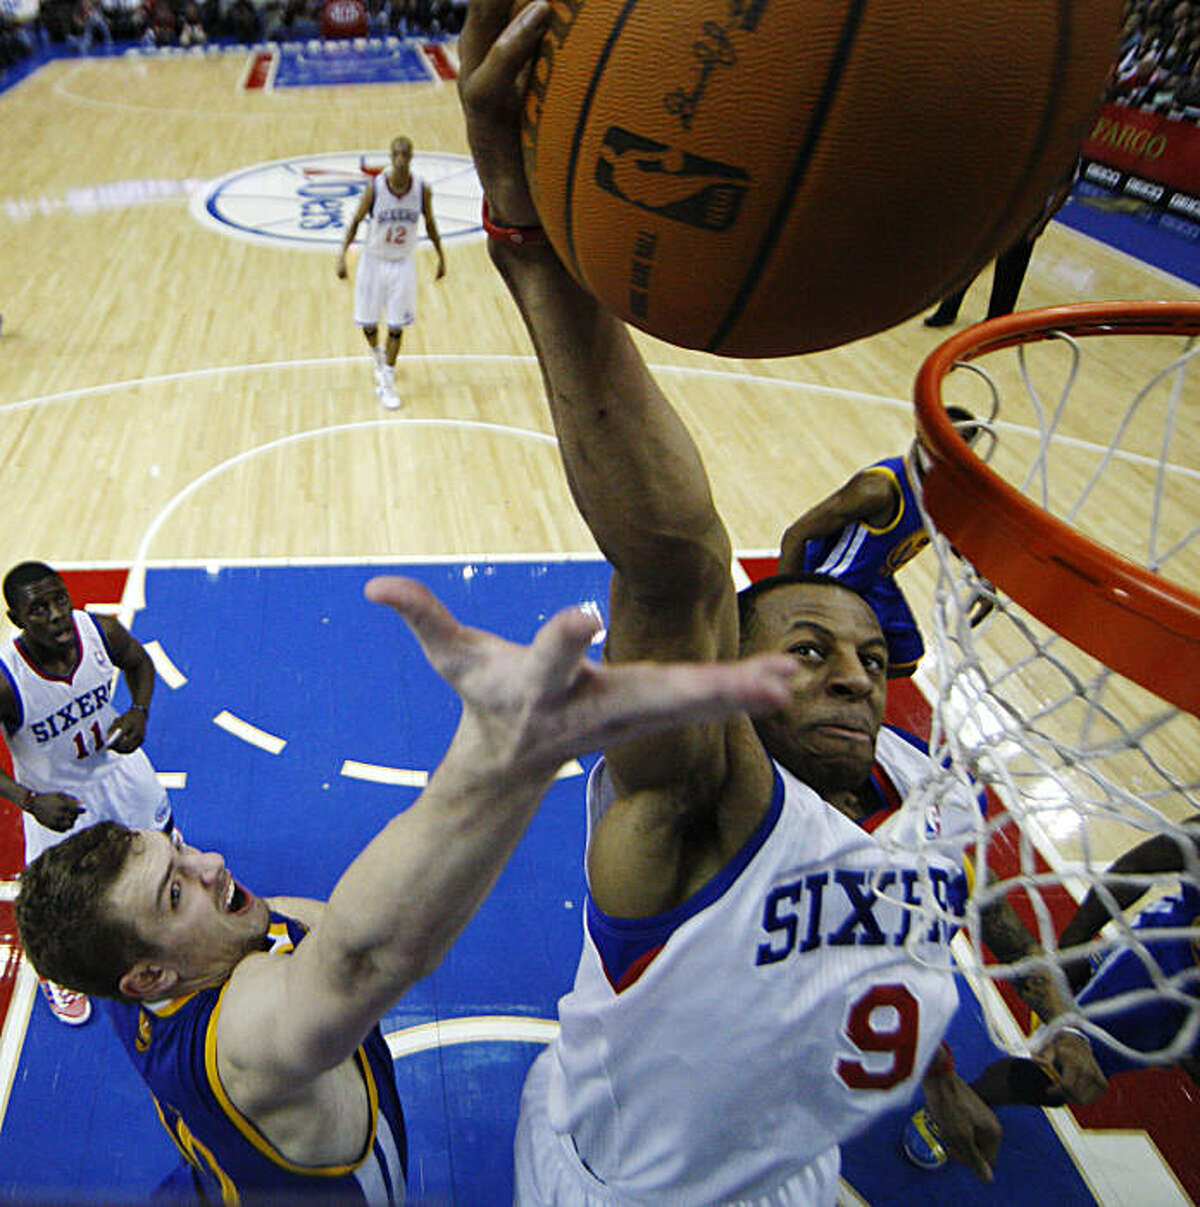 Philadelphia 76ers' Andre Iguodala, right, goes up for a dunk against Golden State Warriors' David Lee in the second half of an NBA basketball game Sunday, March 6, 2011, in Philadelphia. Philadelphia won 125-117 in overtime.